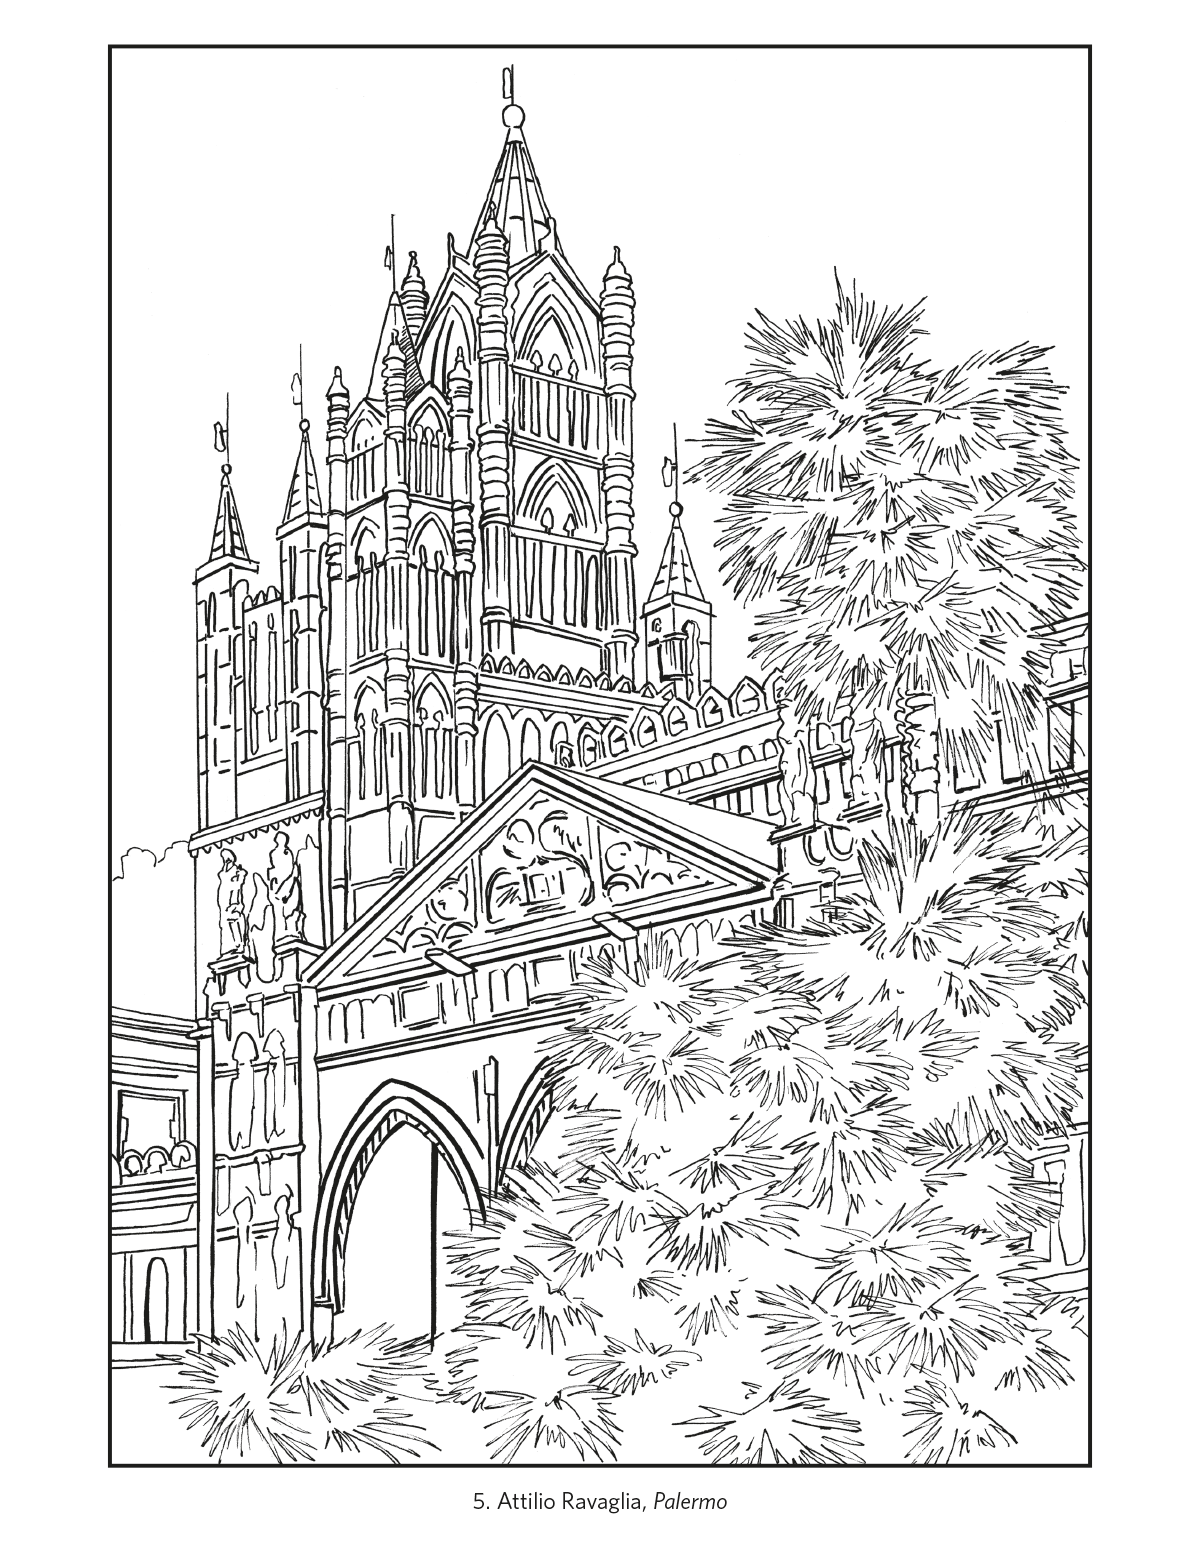 coloring pages of italy 24 free italy coloring pages for kids coloring pages coloring pages of italy 